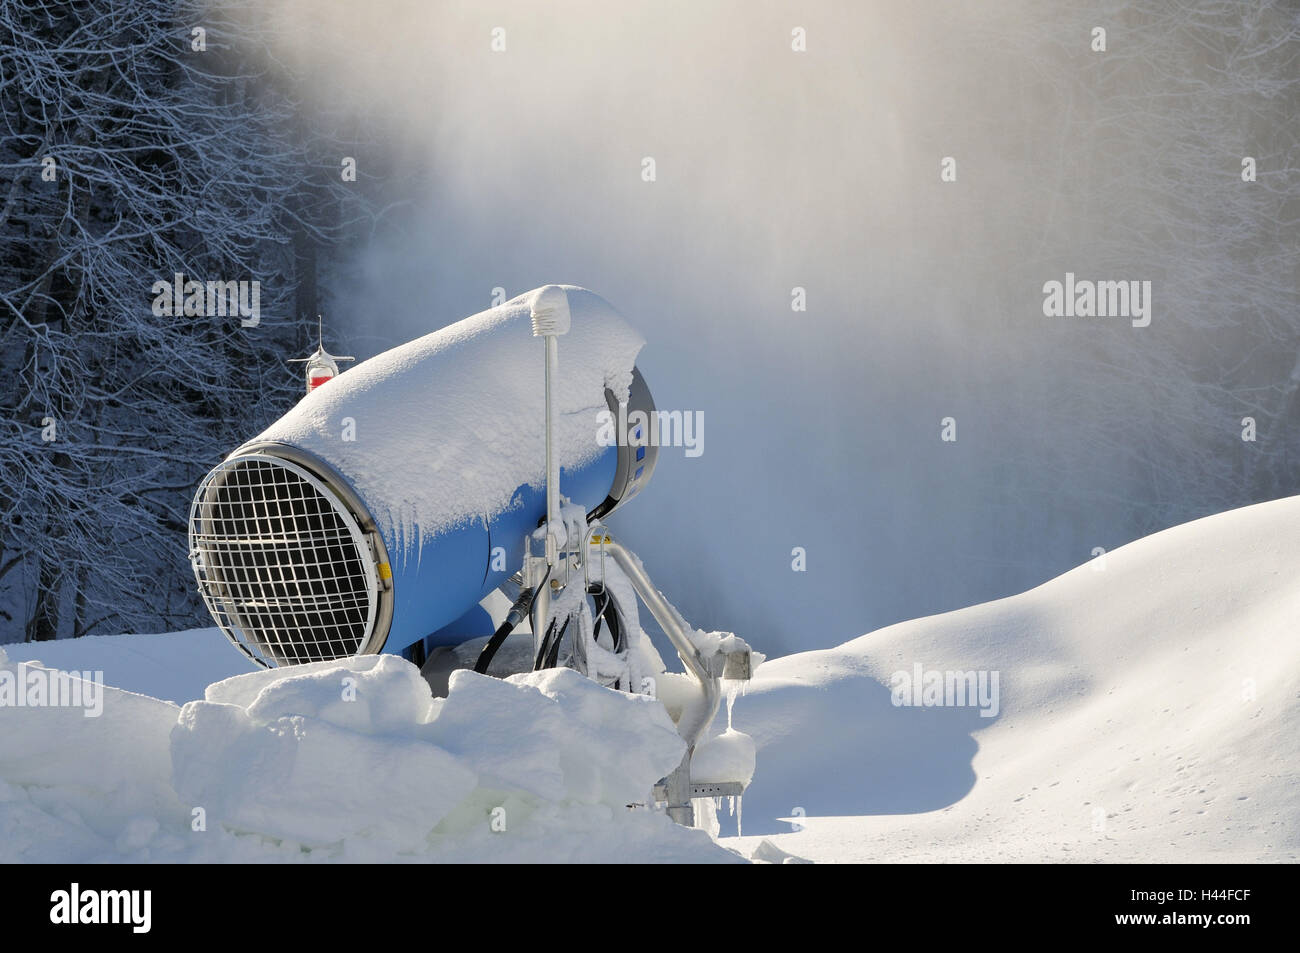 Snow cannon, blue, freezes over, snowy, snow, wood, winter, Stock Photo